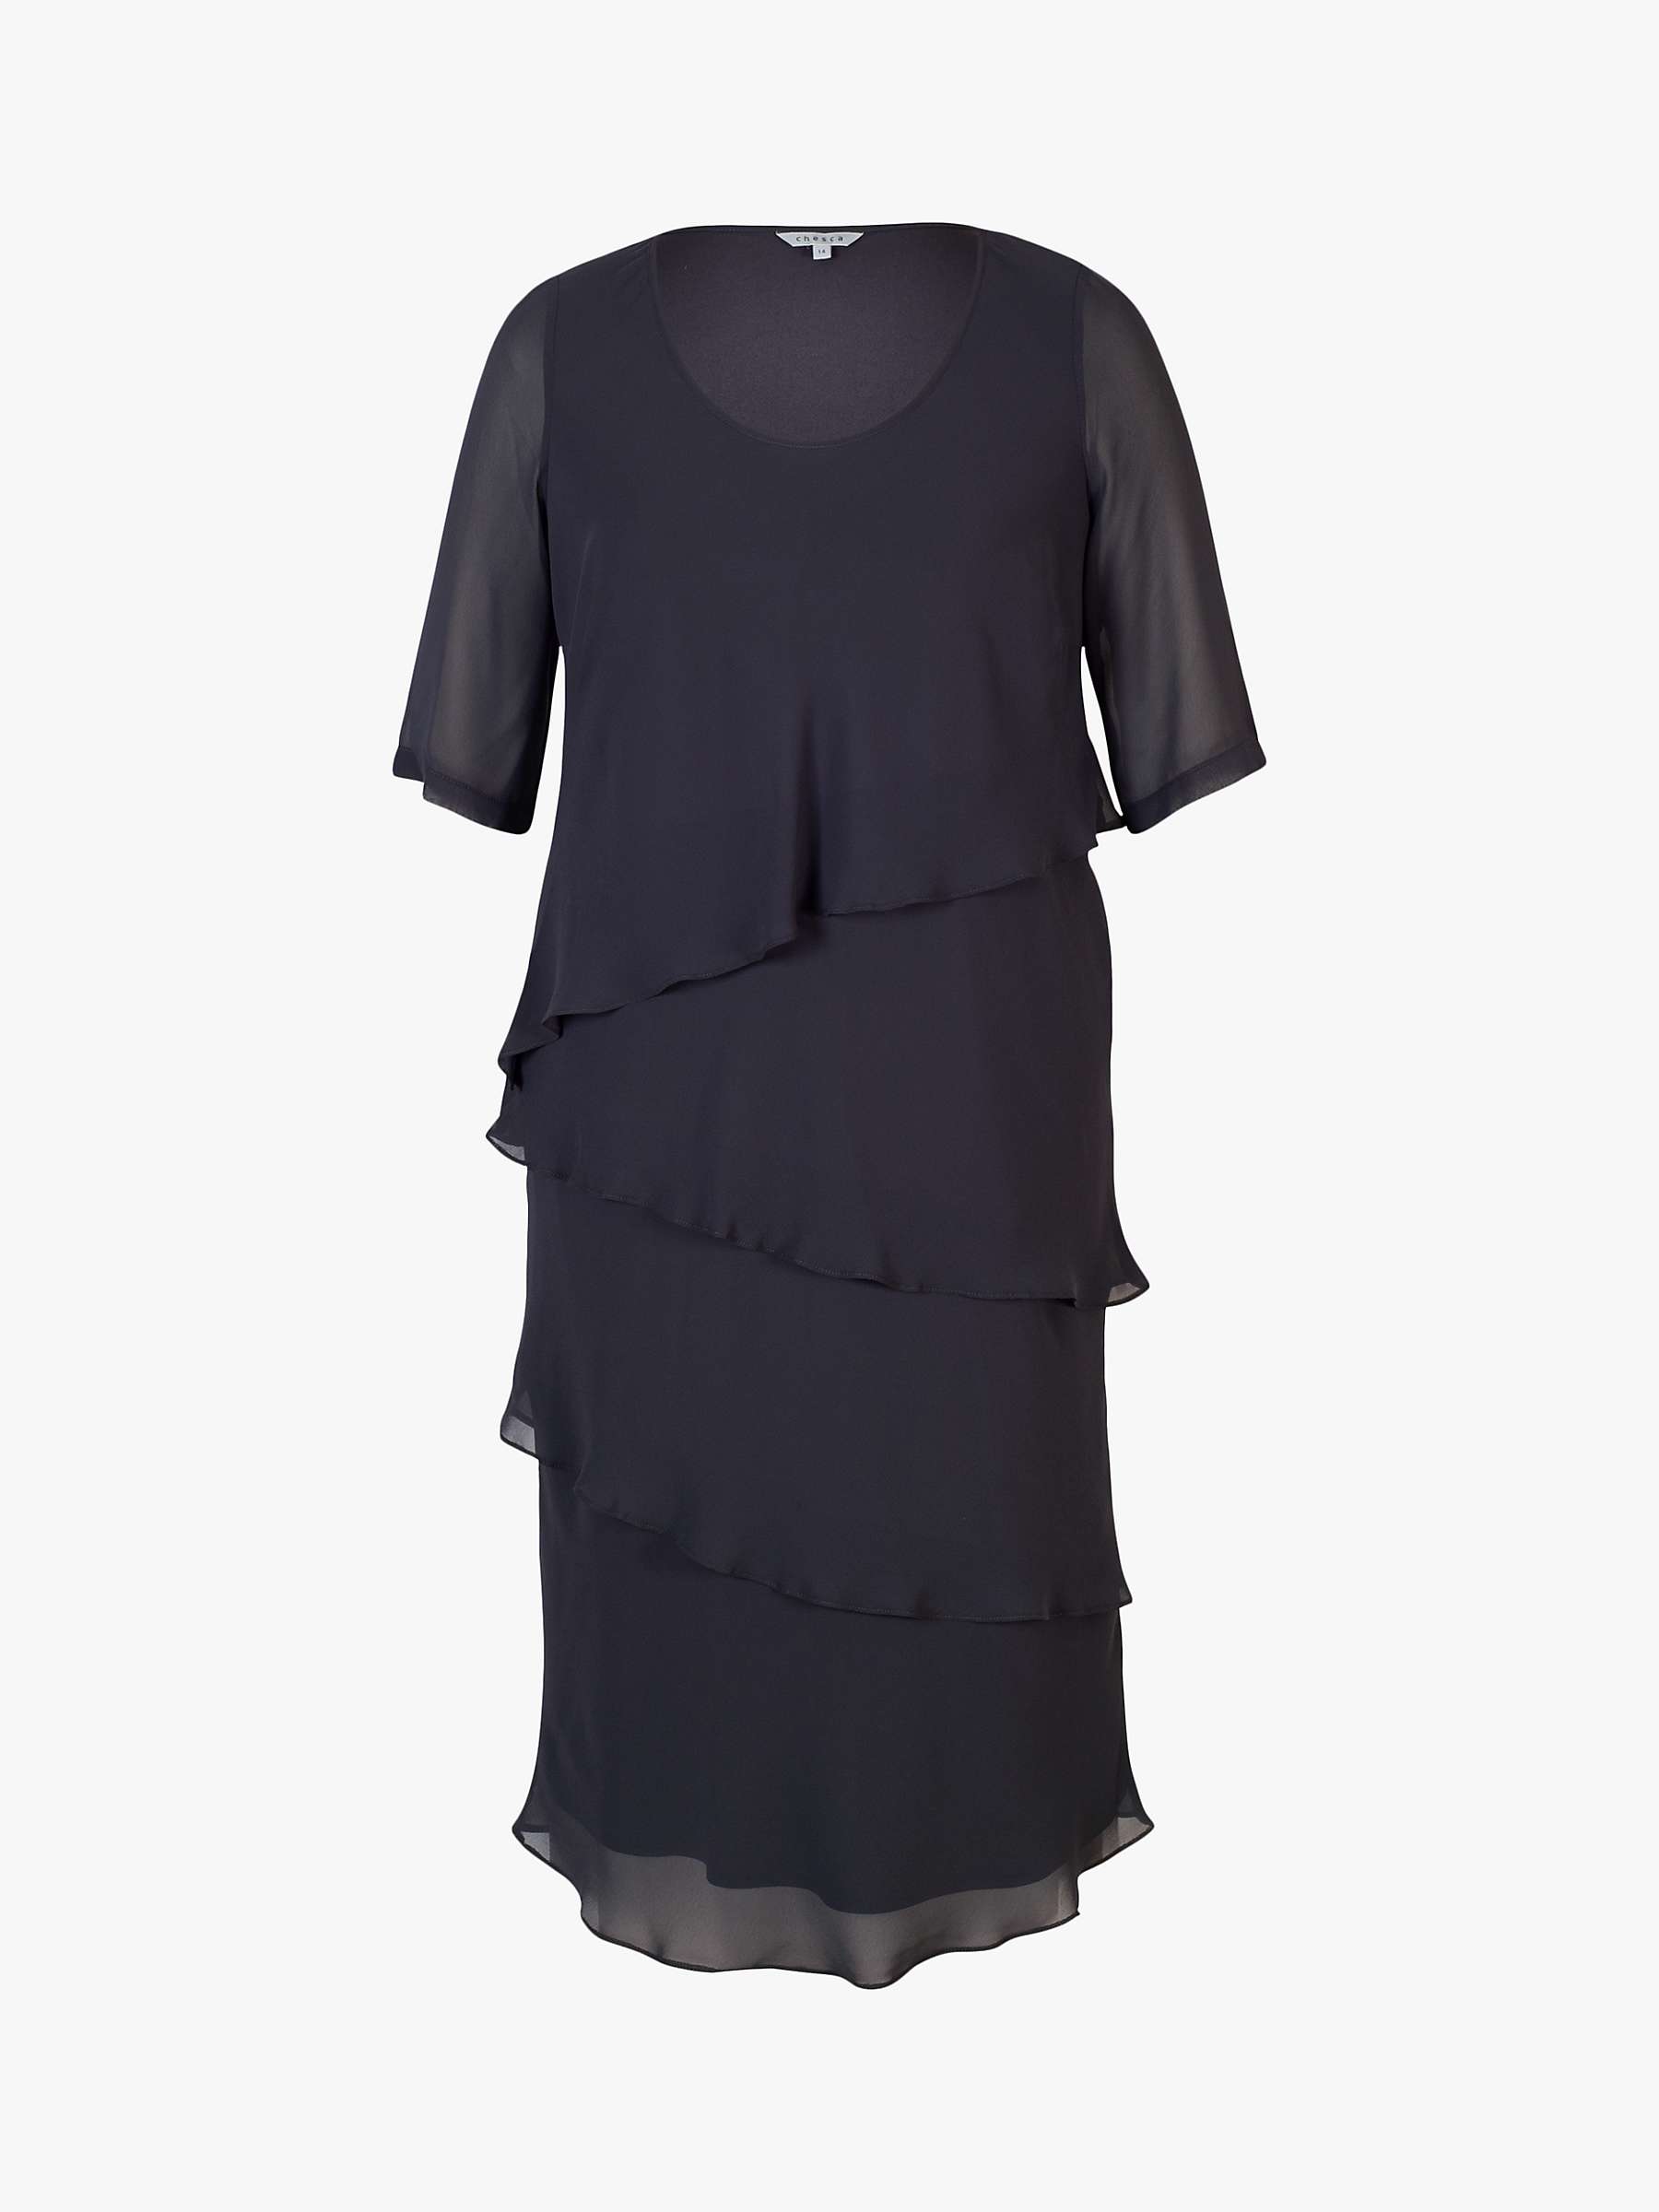 Buy chesca Layered Knee Length Dress Online at johnlewis.com